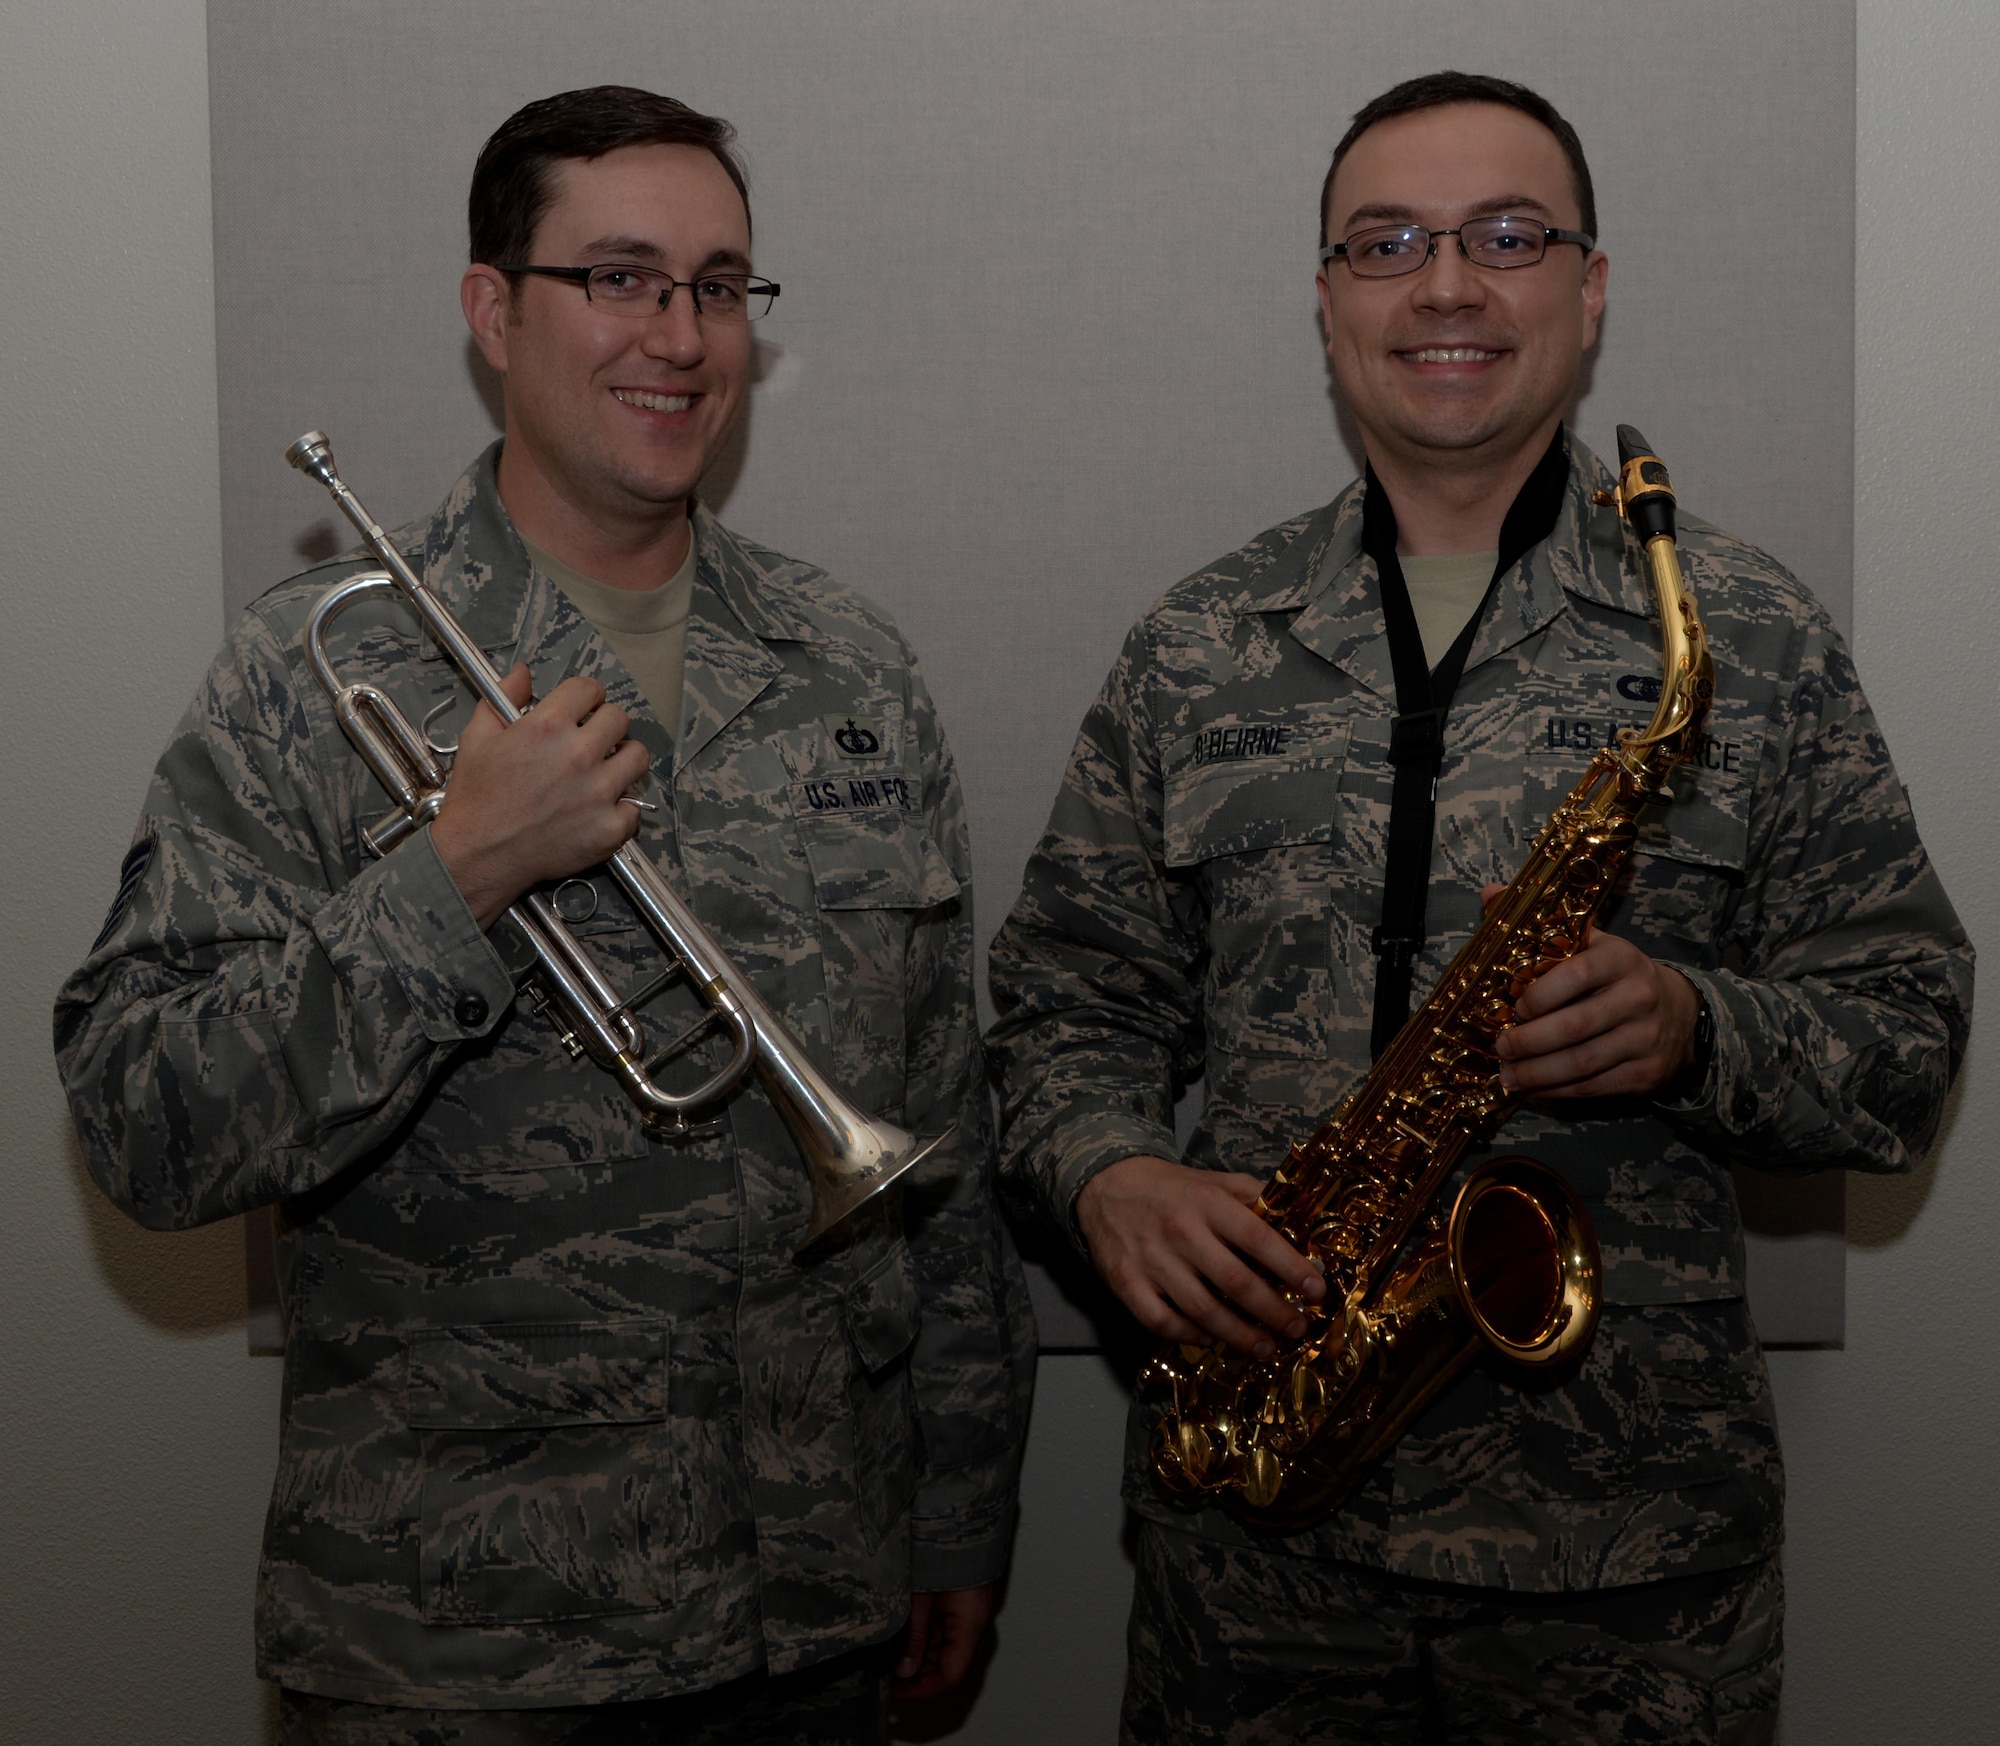 Tech. Sgt. Tom Salyers, (Left) U.S. Air Force Band of the Golden West Travis Brass Quintet noncommissioned officer in charge from Pittsburgh, Pennsylvania and Airman 1st Class, Ian O'Bierne, BOGW saxophonist from Pennsauken, New Jersey, pose for a photo at Travis Air Force Base, Calif., Nov. 15, 2016. Salyers and O'Bierne joined the band in July. (U.S. Air Force photo by Tech. Sgt. James Hodgman)